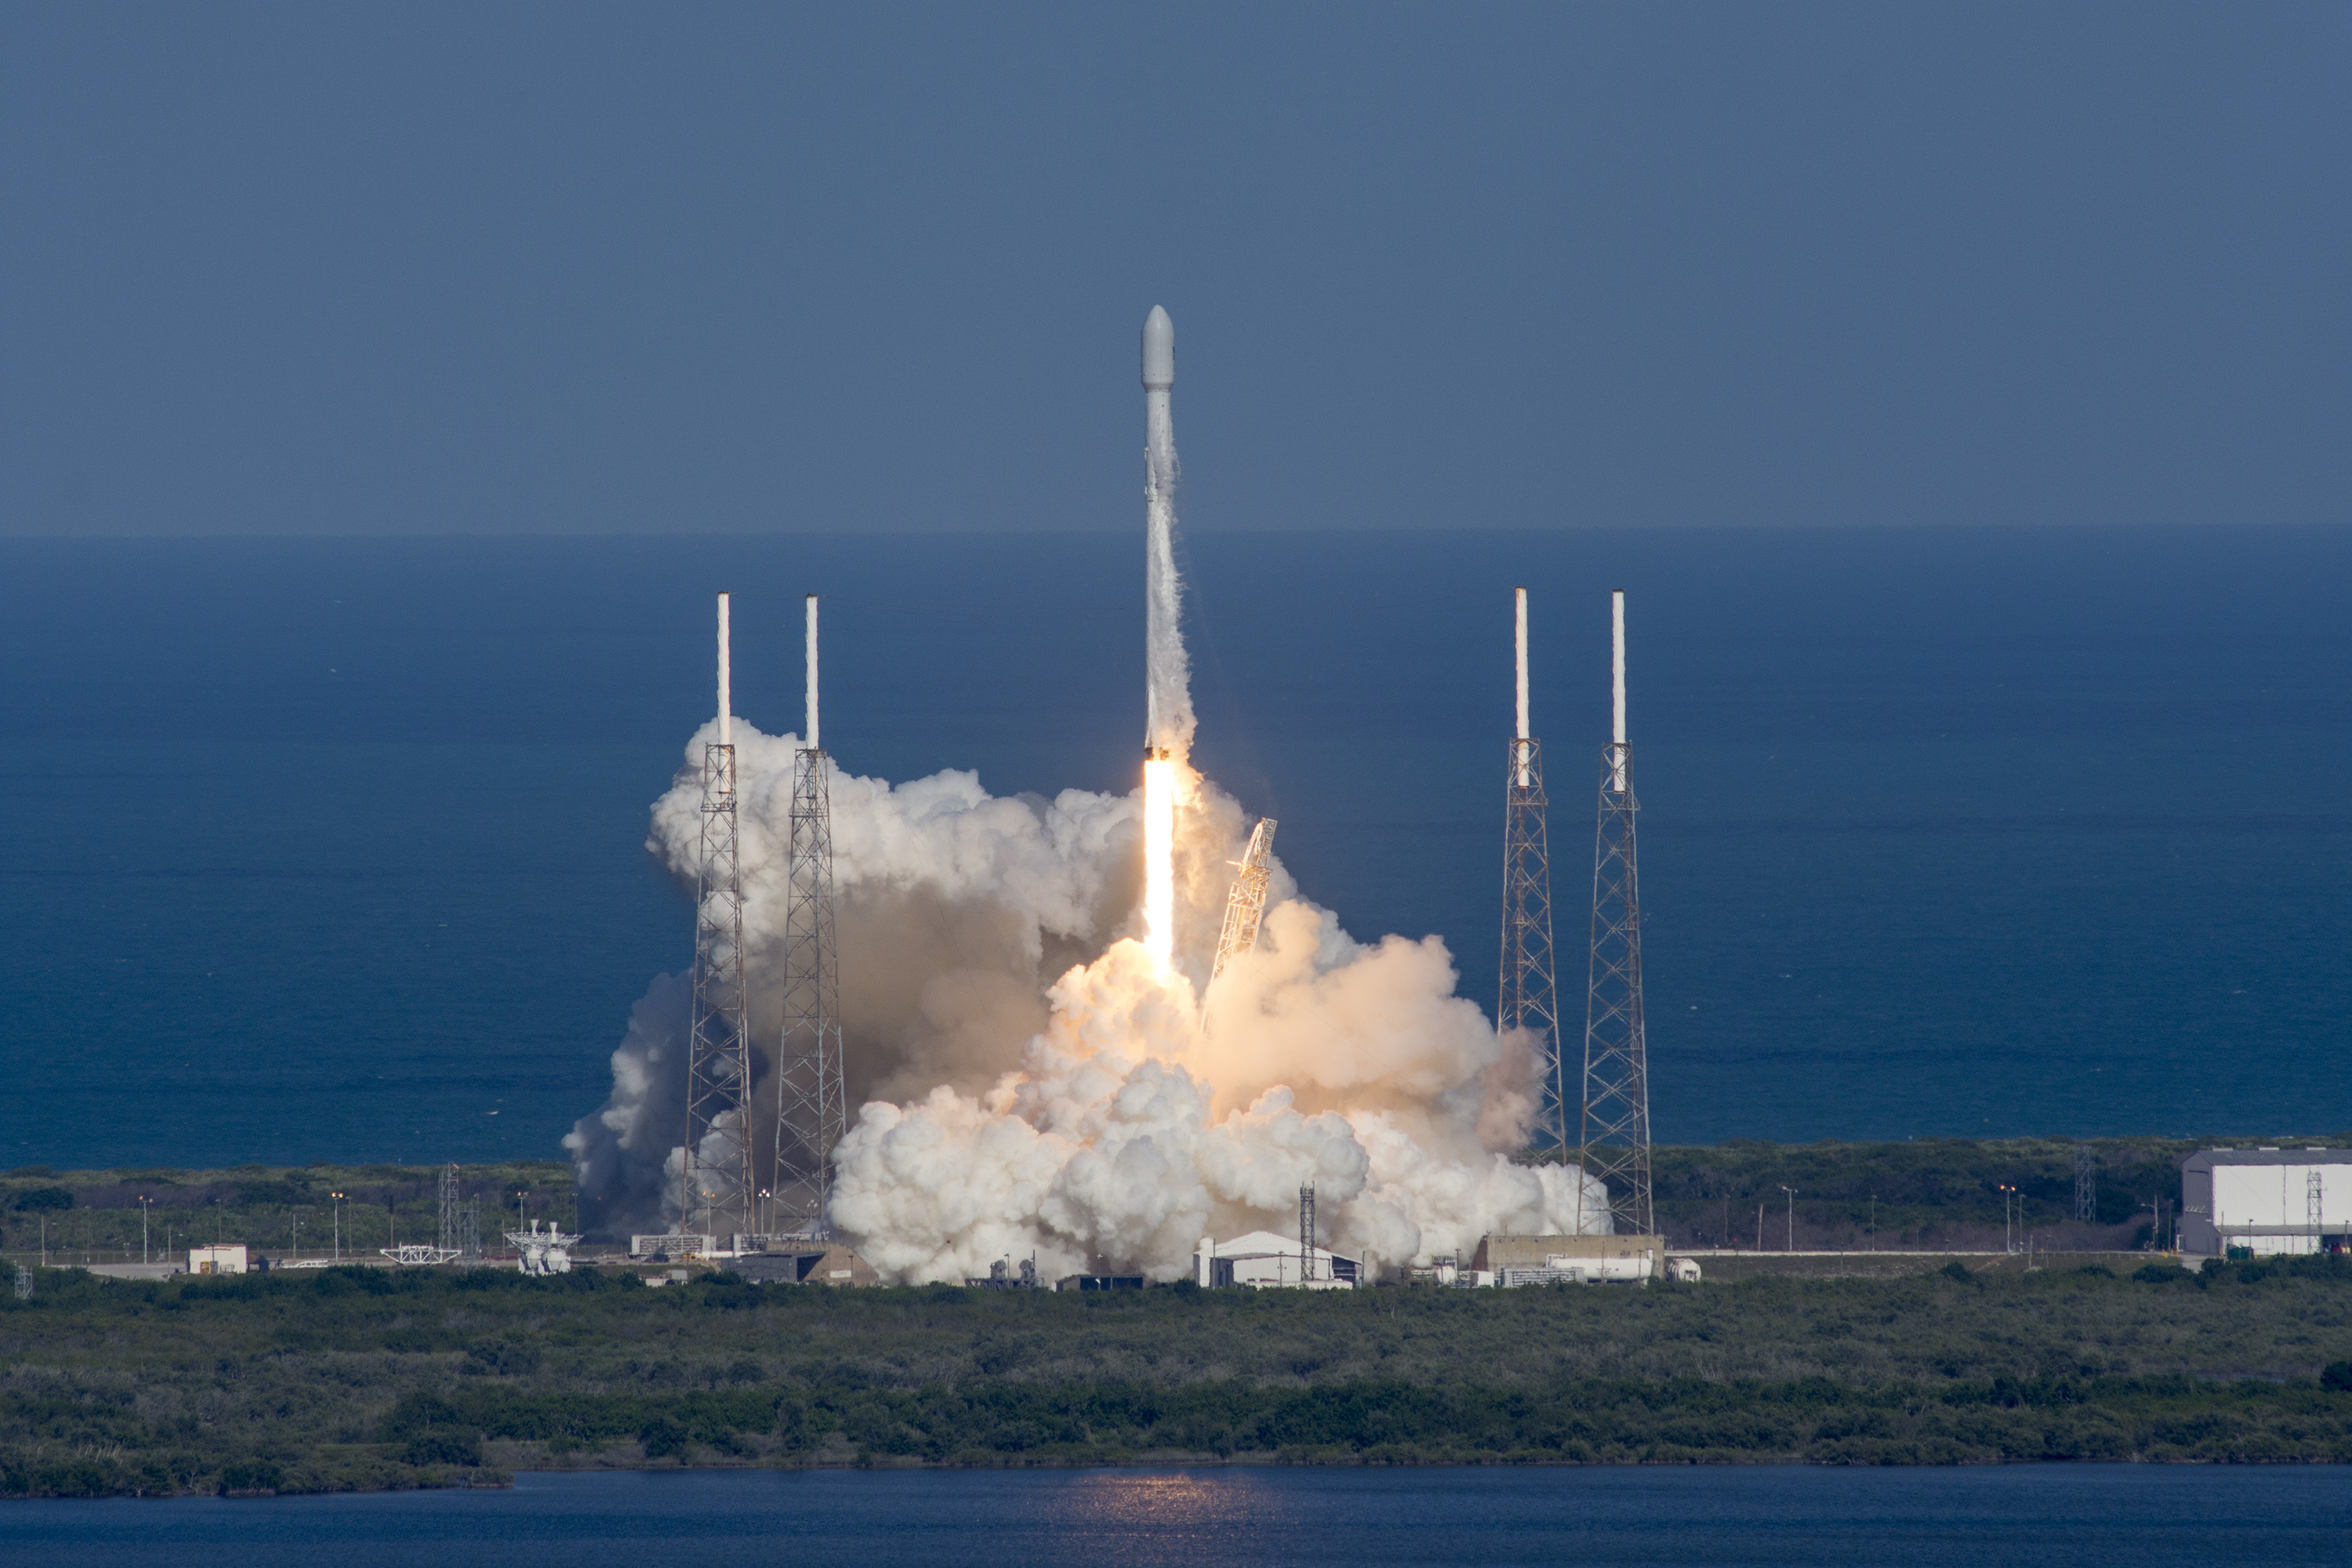 In this photo released by Space X's, the Thaicom 8 rocket lifts off from space launch complex 40 at Cape Canaveral, Florida on May 27, 2016  SpaceX launched an Asian communications satellite into a distant orbit and for the fourth time managed to recover the rocket that did the work.Under blue skies dotted with clouds, the shiny white Falcon 9 rocket blasted off from Cape Canaveral, Florida at 5:40 pm (2140 GMT) carrying the Thaicom 8 satellite.  / AFP PHOTO / SPACEX / spacex / RESTRICTED TO EDITORIAL USE - MANDATORY CREDIT "AFP PHOTO / SPACE X" - NO MARKETING - NO ADVERTISING CAMPAIGNS - DISTRIBUTED AS A SERVICE TO CLIENTS